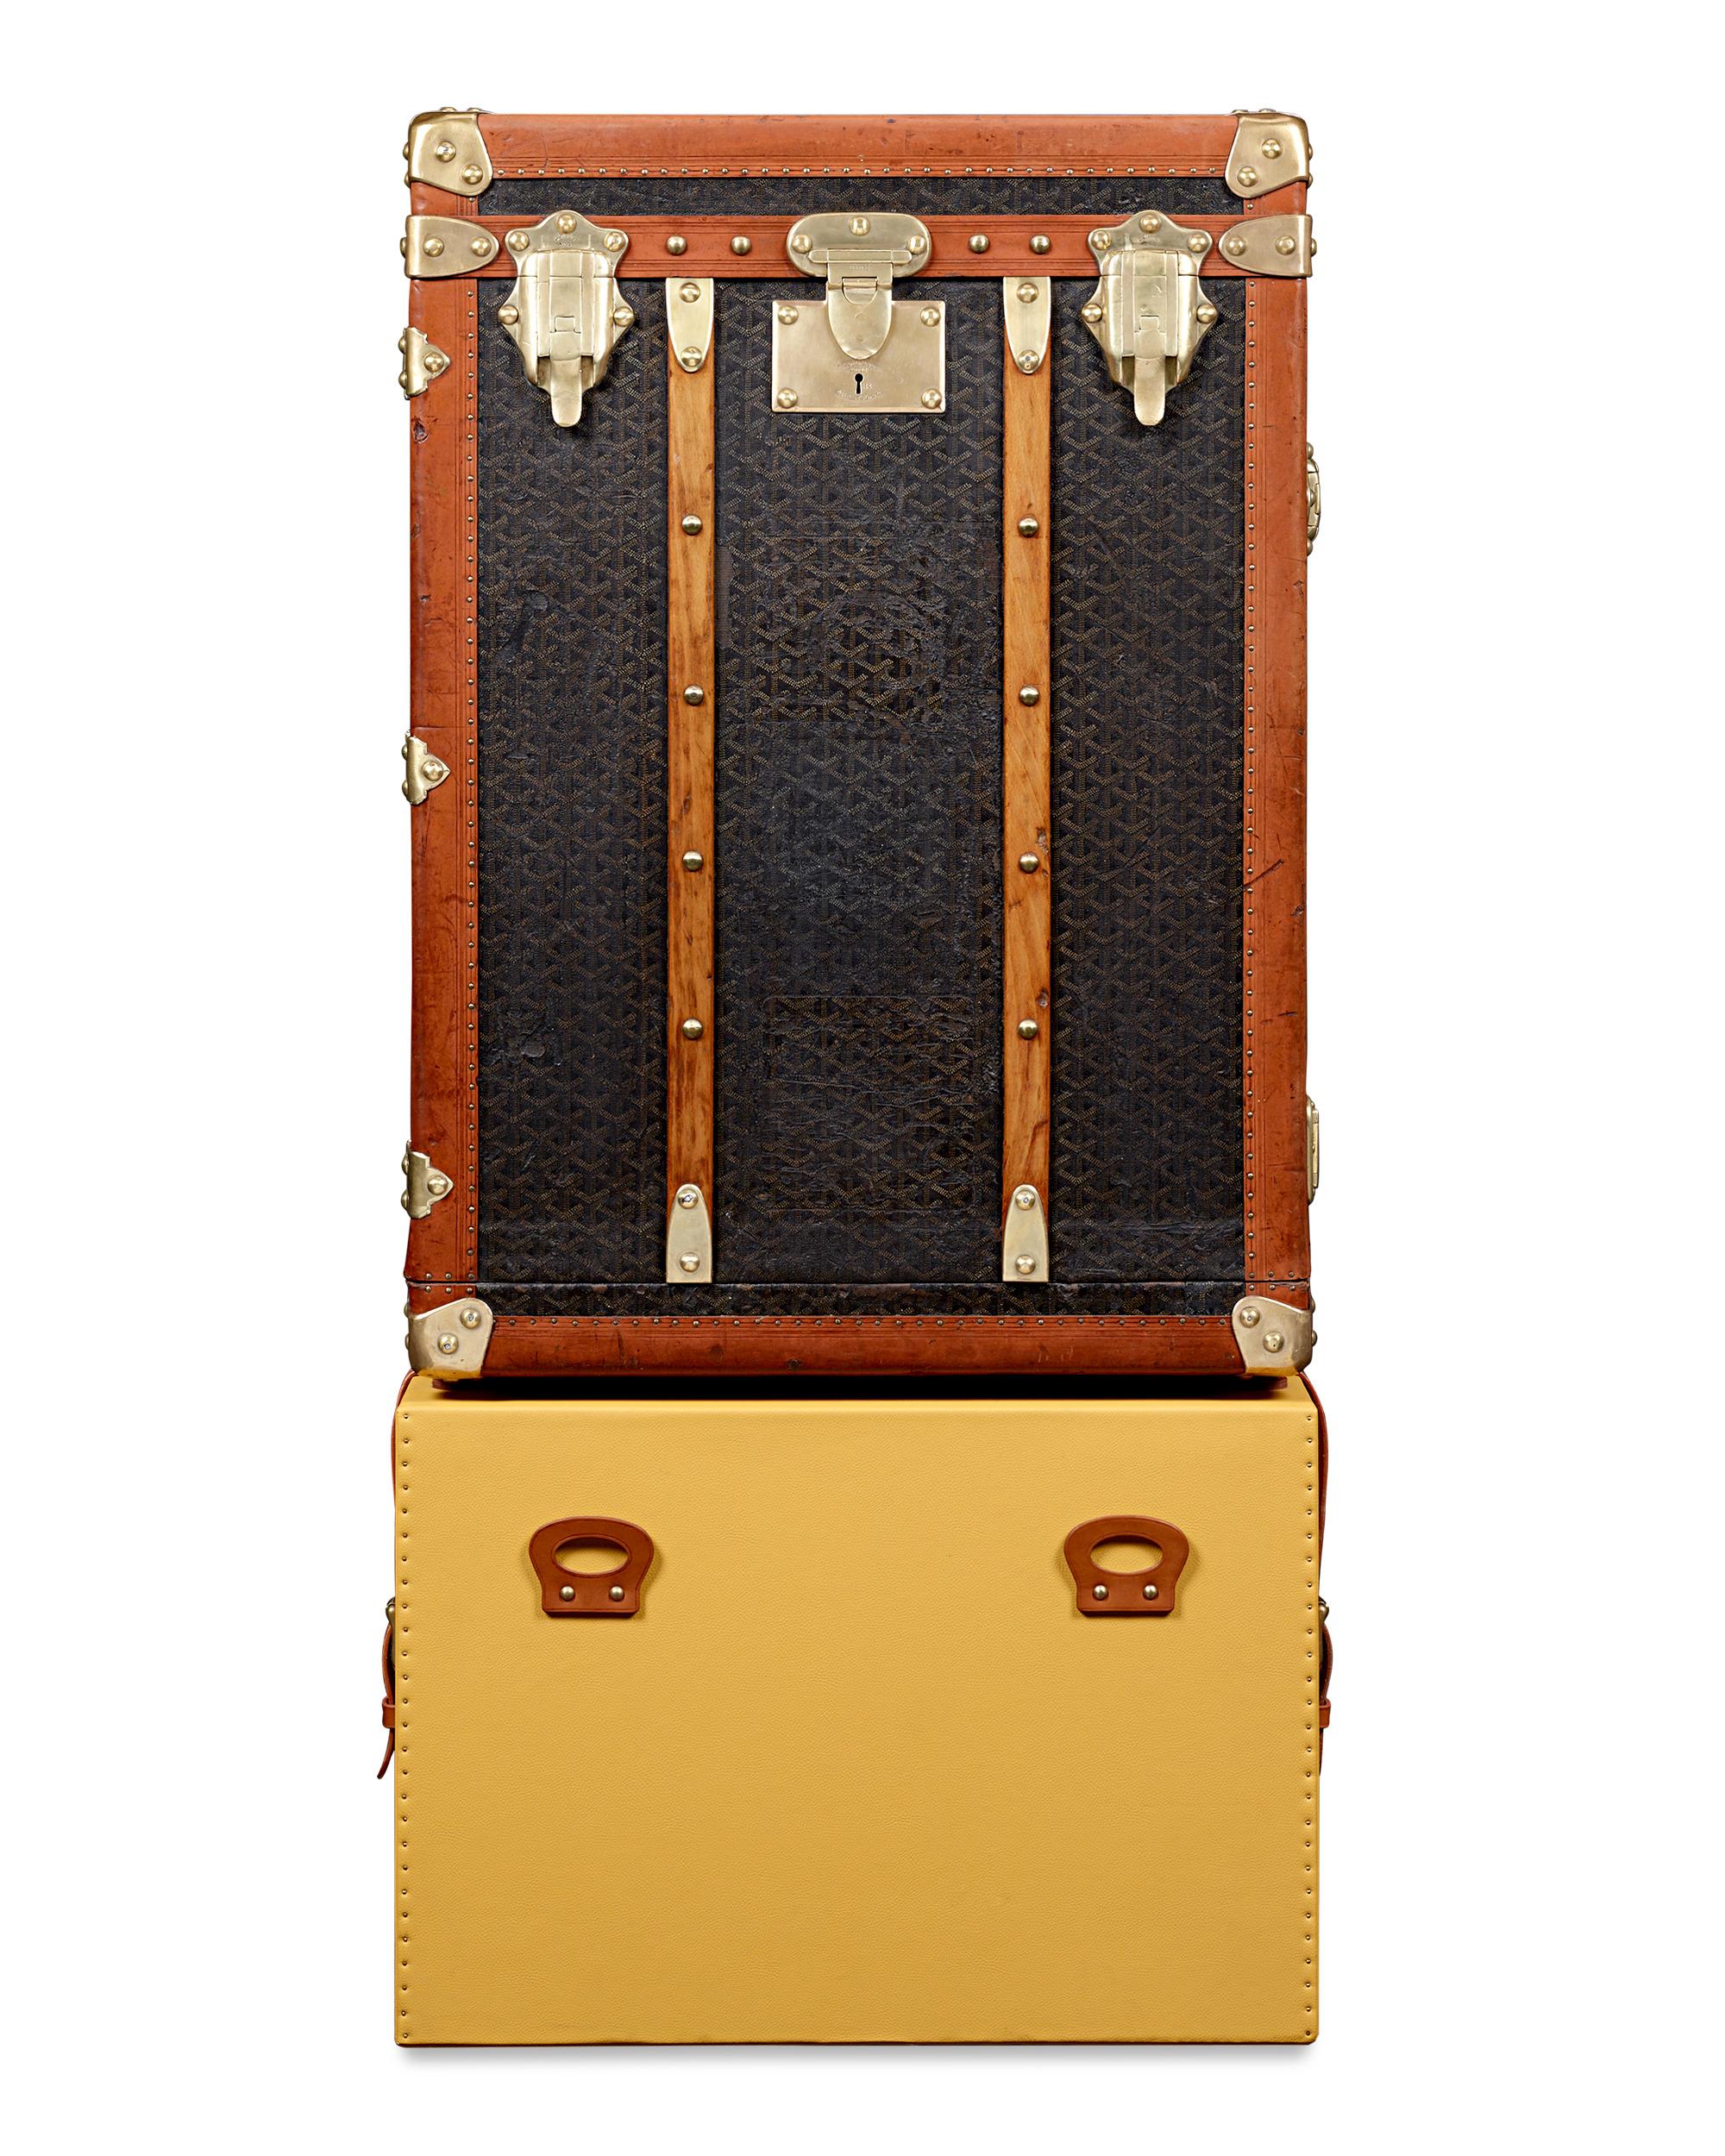 This early 20th-century Goyard travel trunk with a fitted bar stands as a testament to the splendor of its era. Adorned with the iconic Goyard chevron pattern meticulously hand-painted in earth tones of brown and white, it pays homage to the brand's